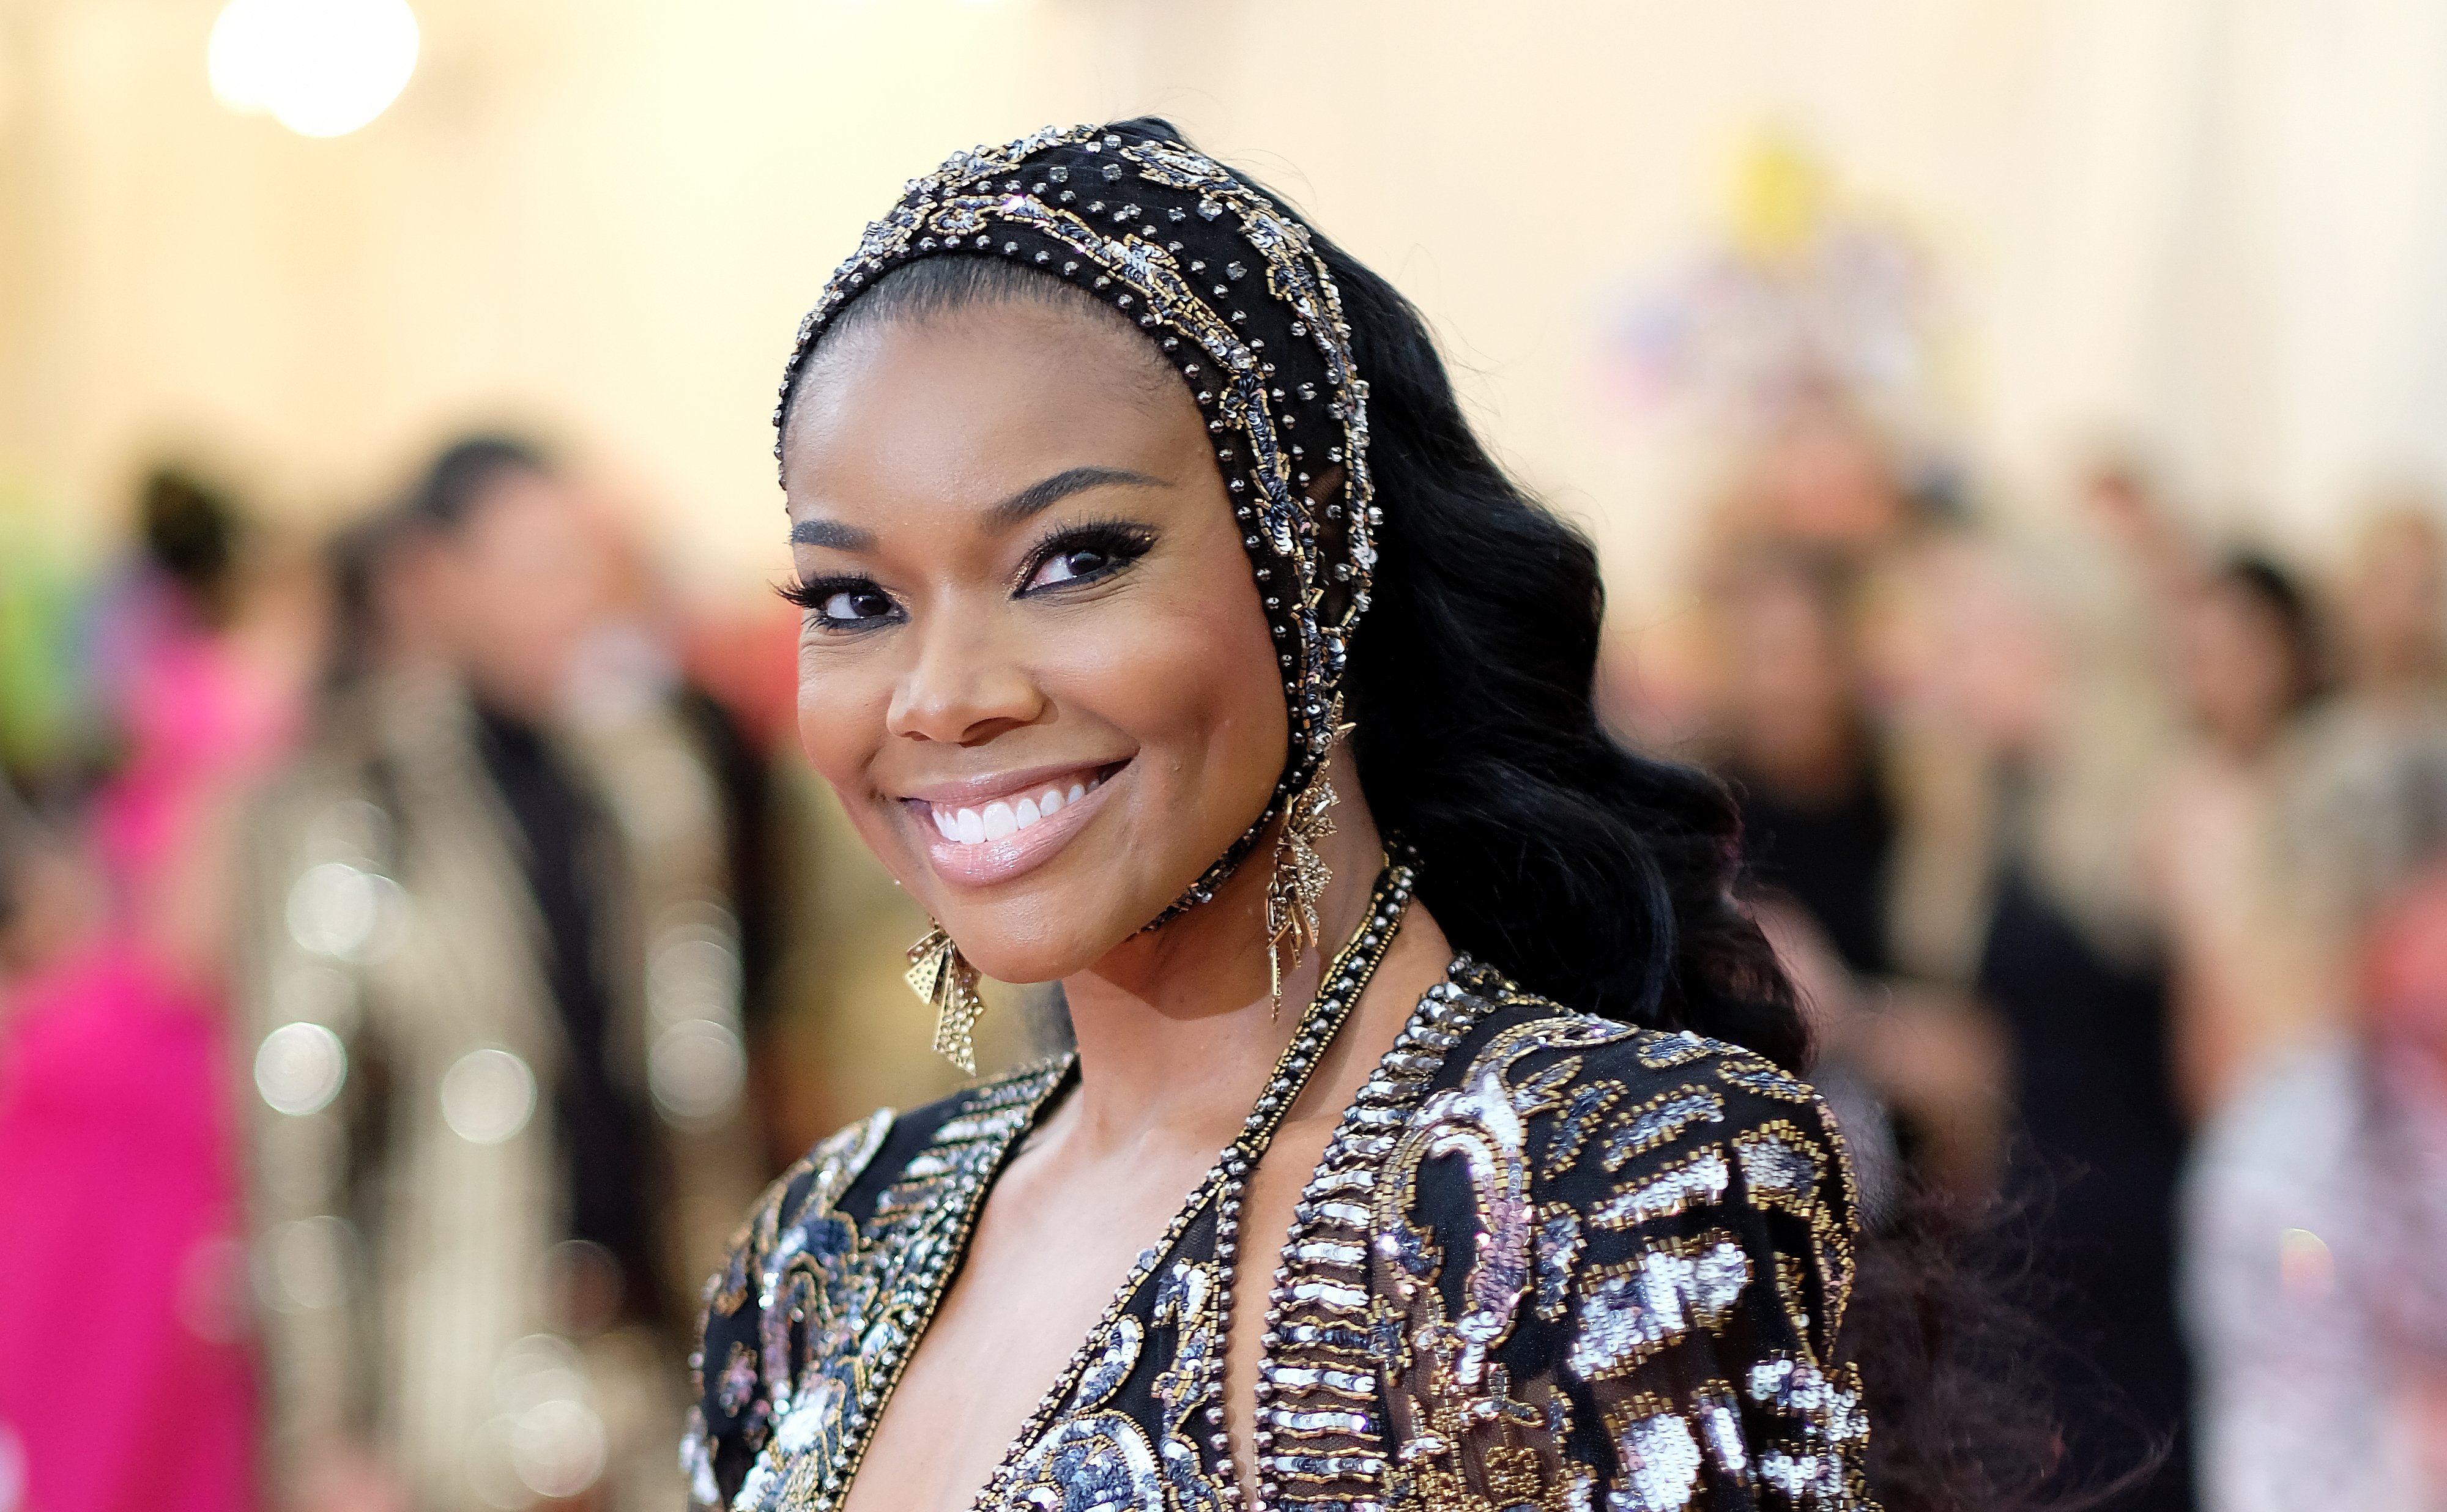 Gabrielle Union attends the 2019 Met Gala at the Metropolitan Museum of Art on May 06, 2019 in New York City.| Photo: Getty Images